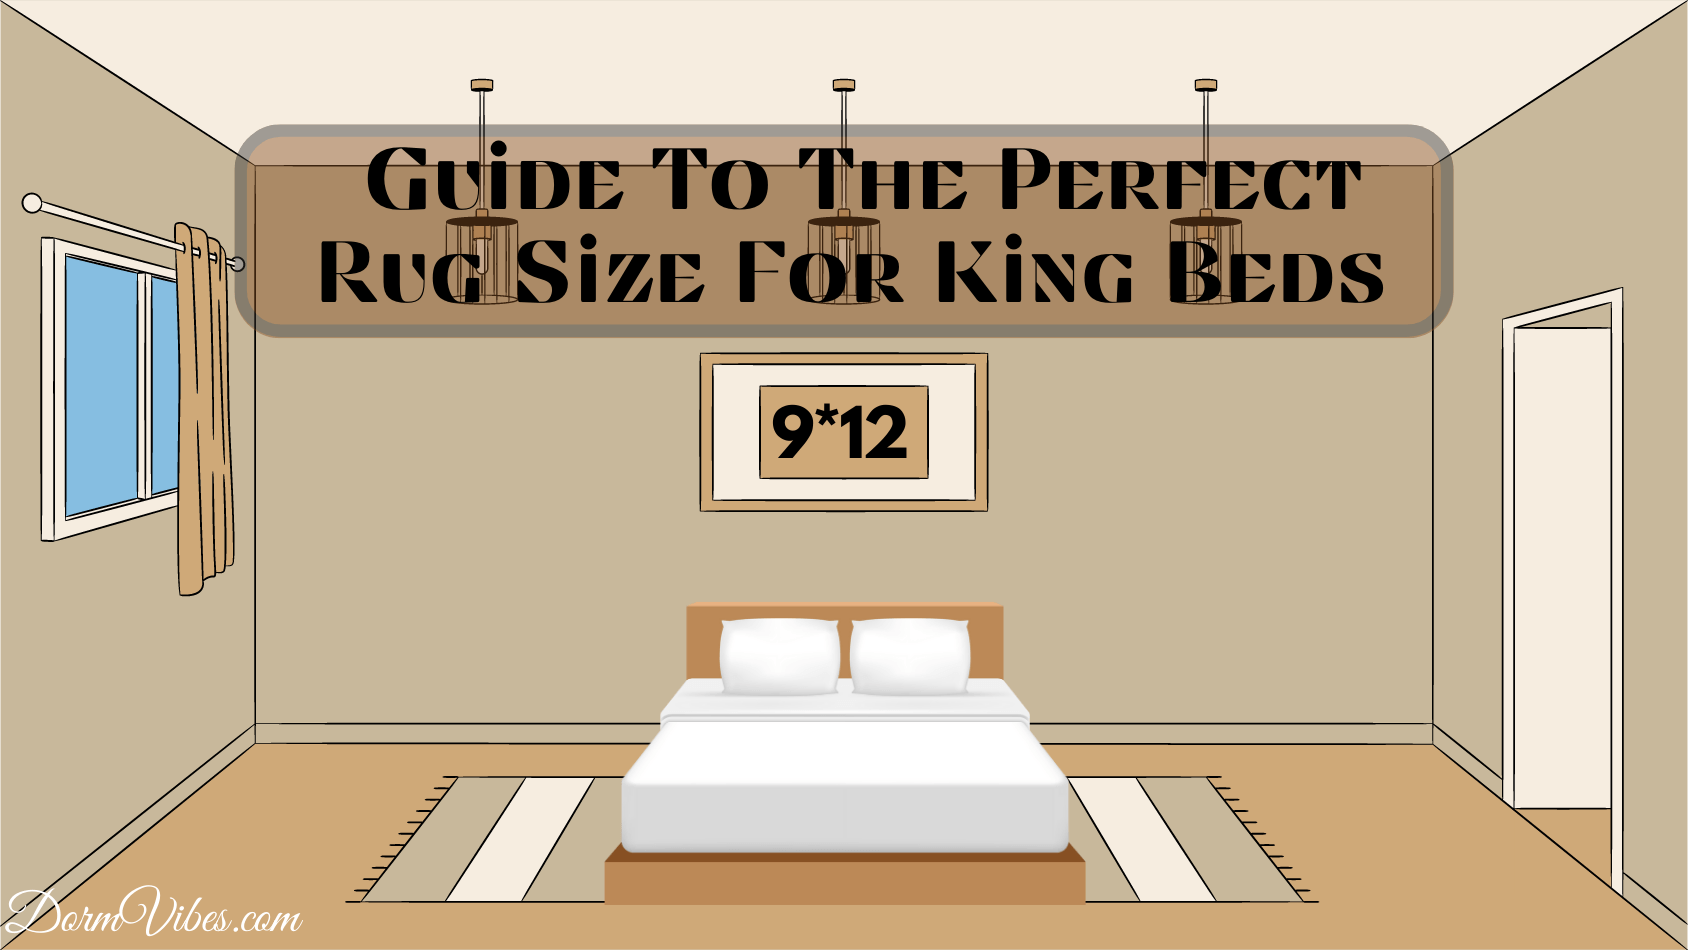 The Ultimate Rug Size Guide